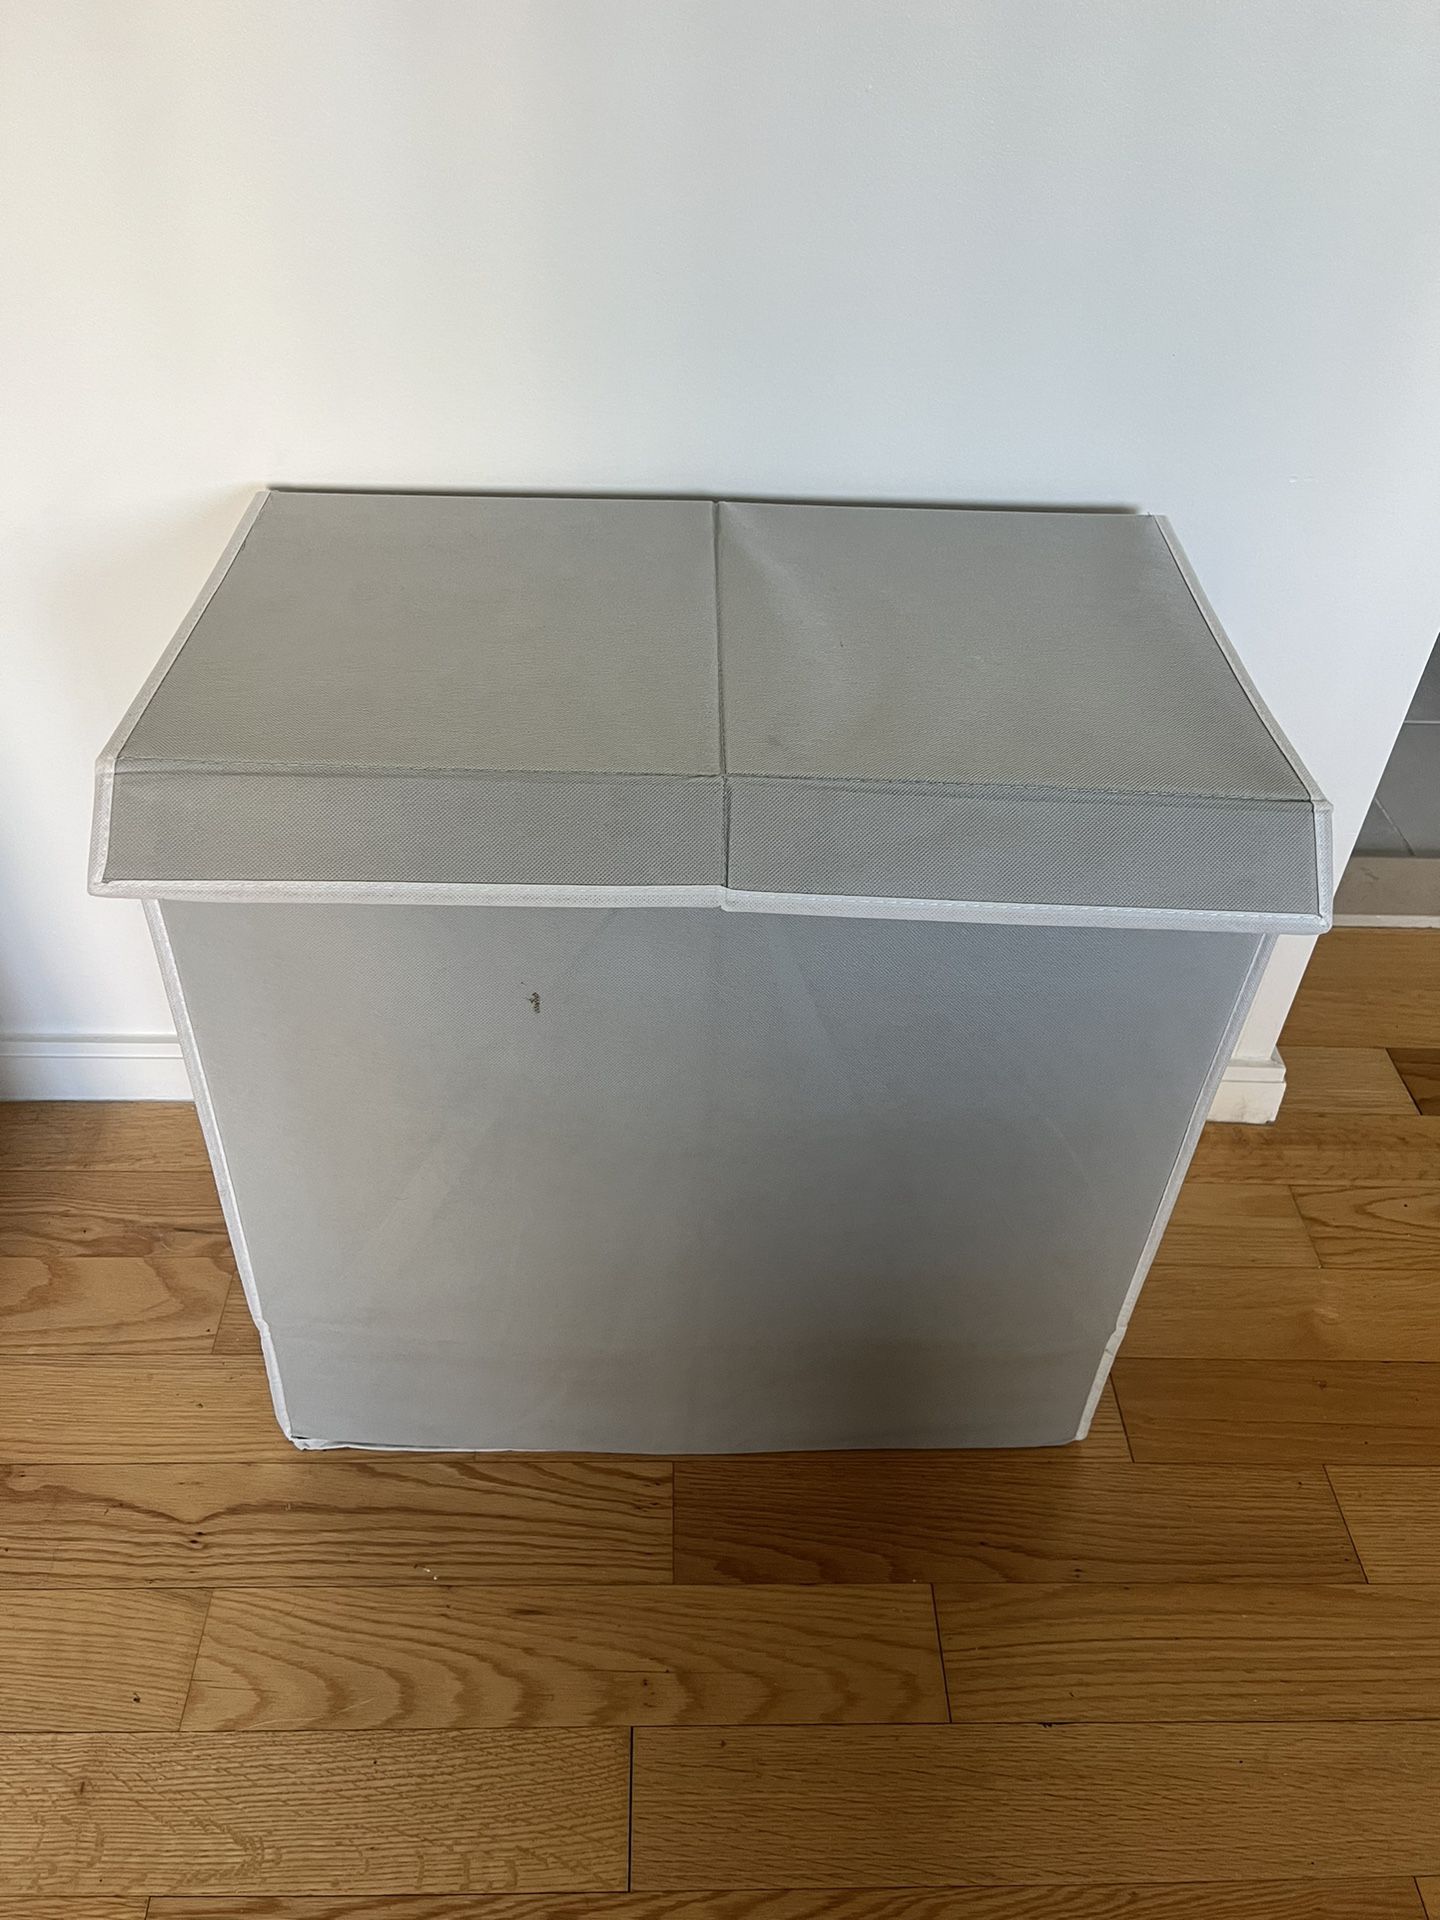 Double sided laundry hamper with lid